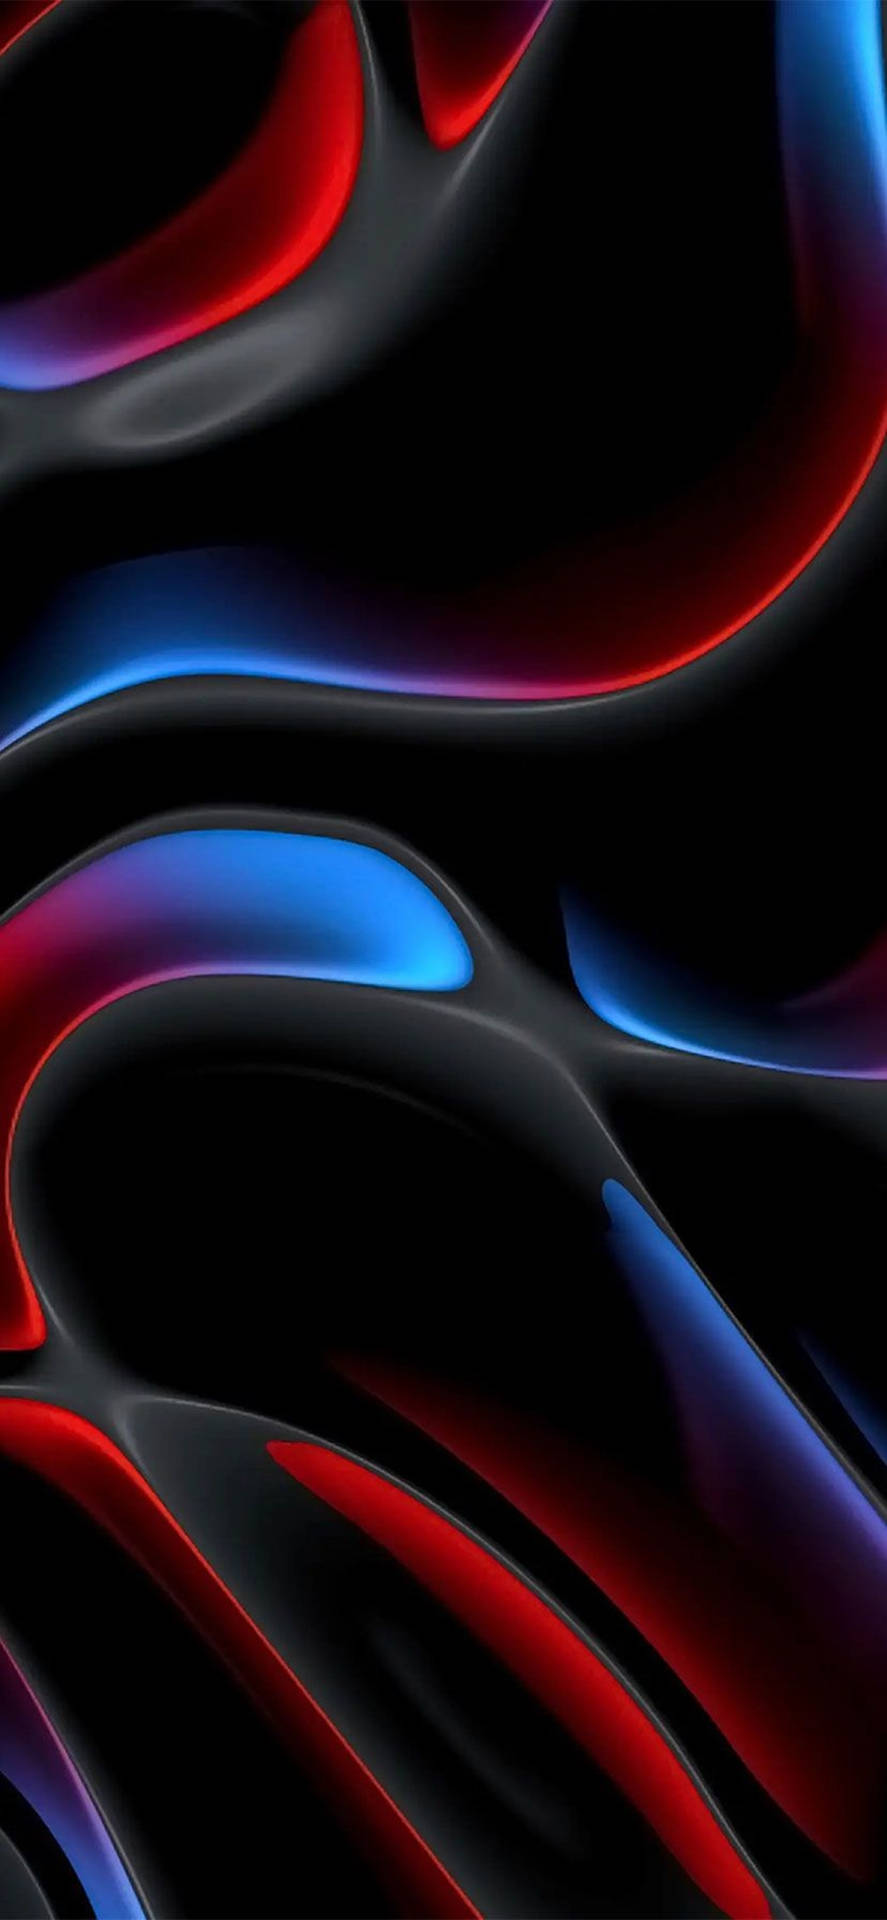 Cool Iphone 11 Blue Red Black Blobs Wallpaper